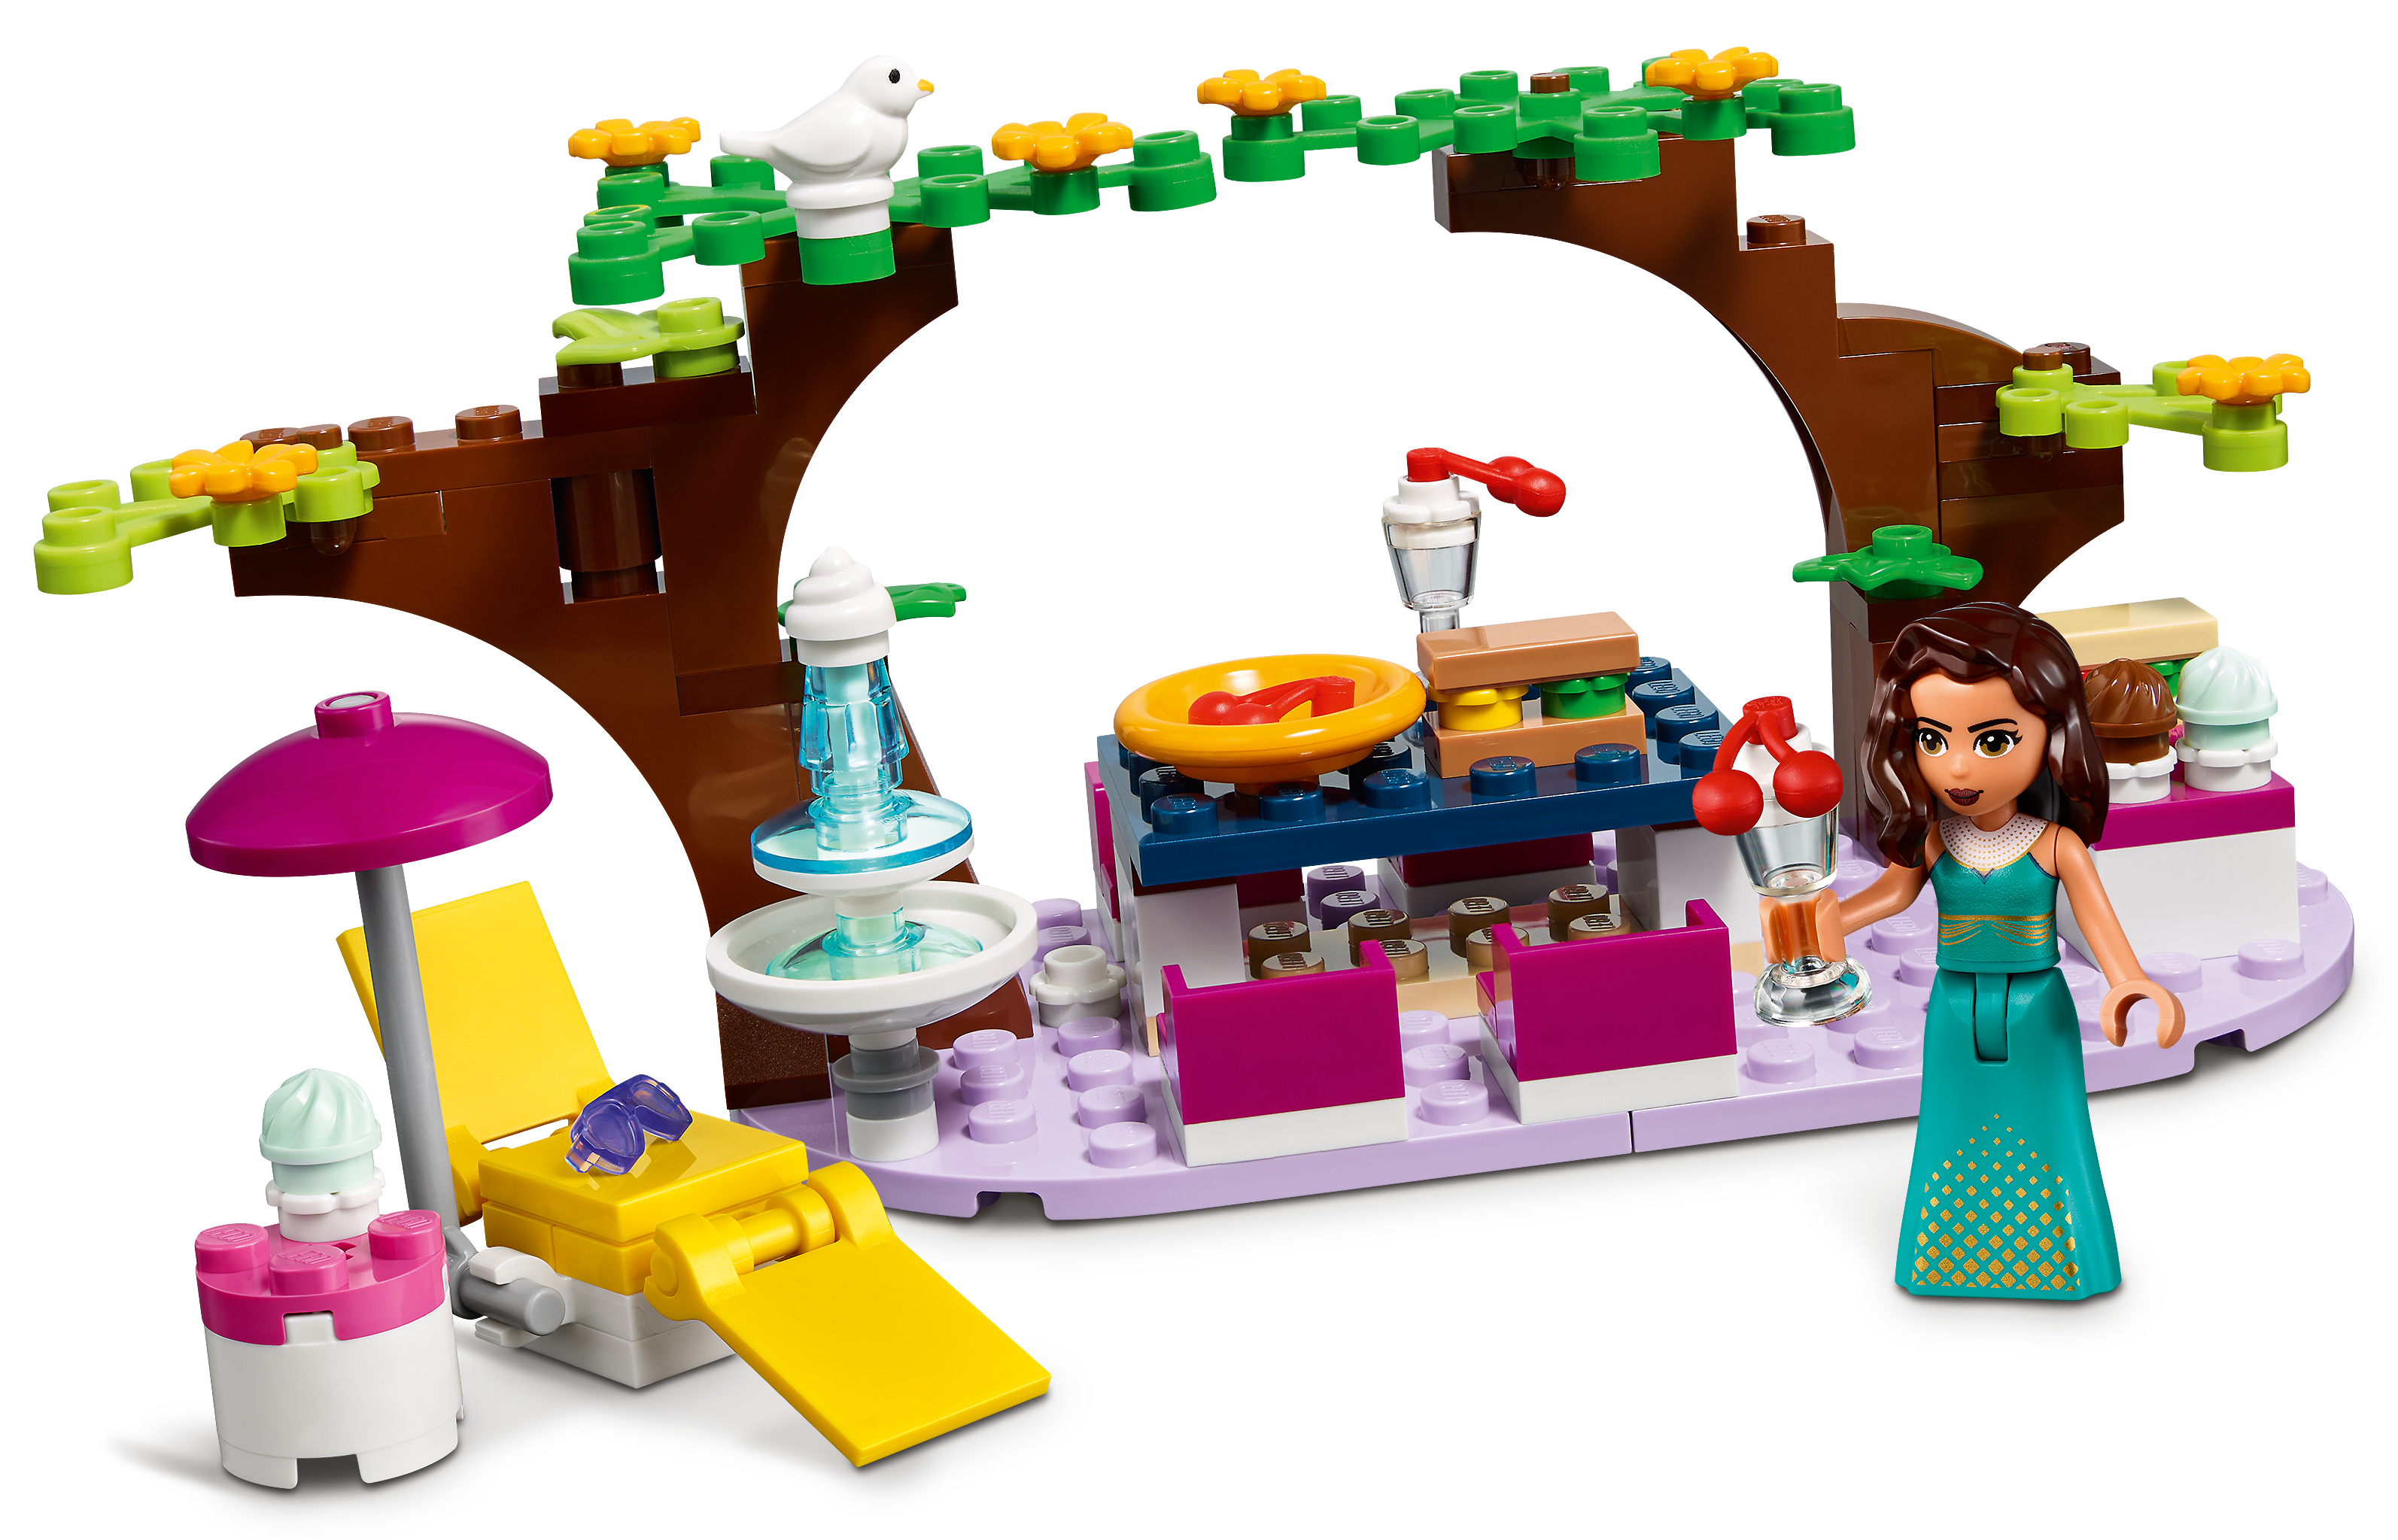 Heartlake City Grand 41684 | Friends | Buy online at the Official LEGO® Shop US